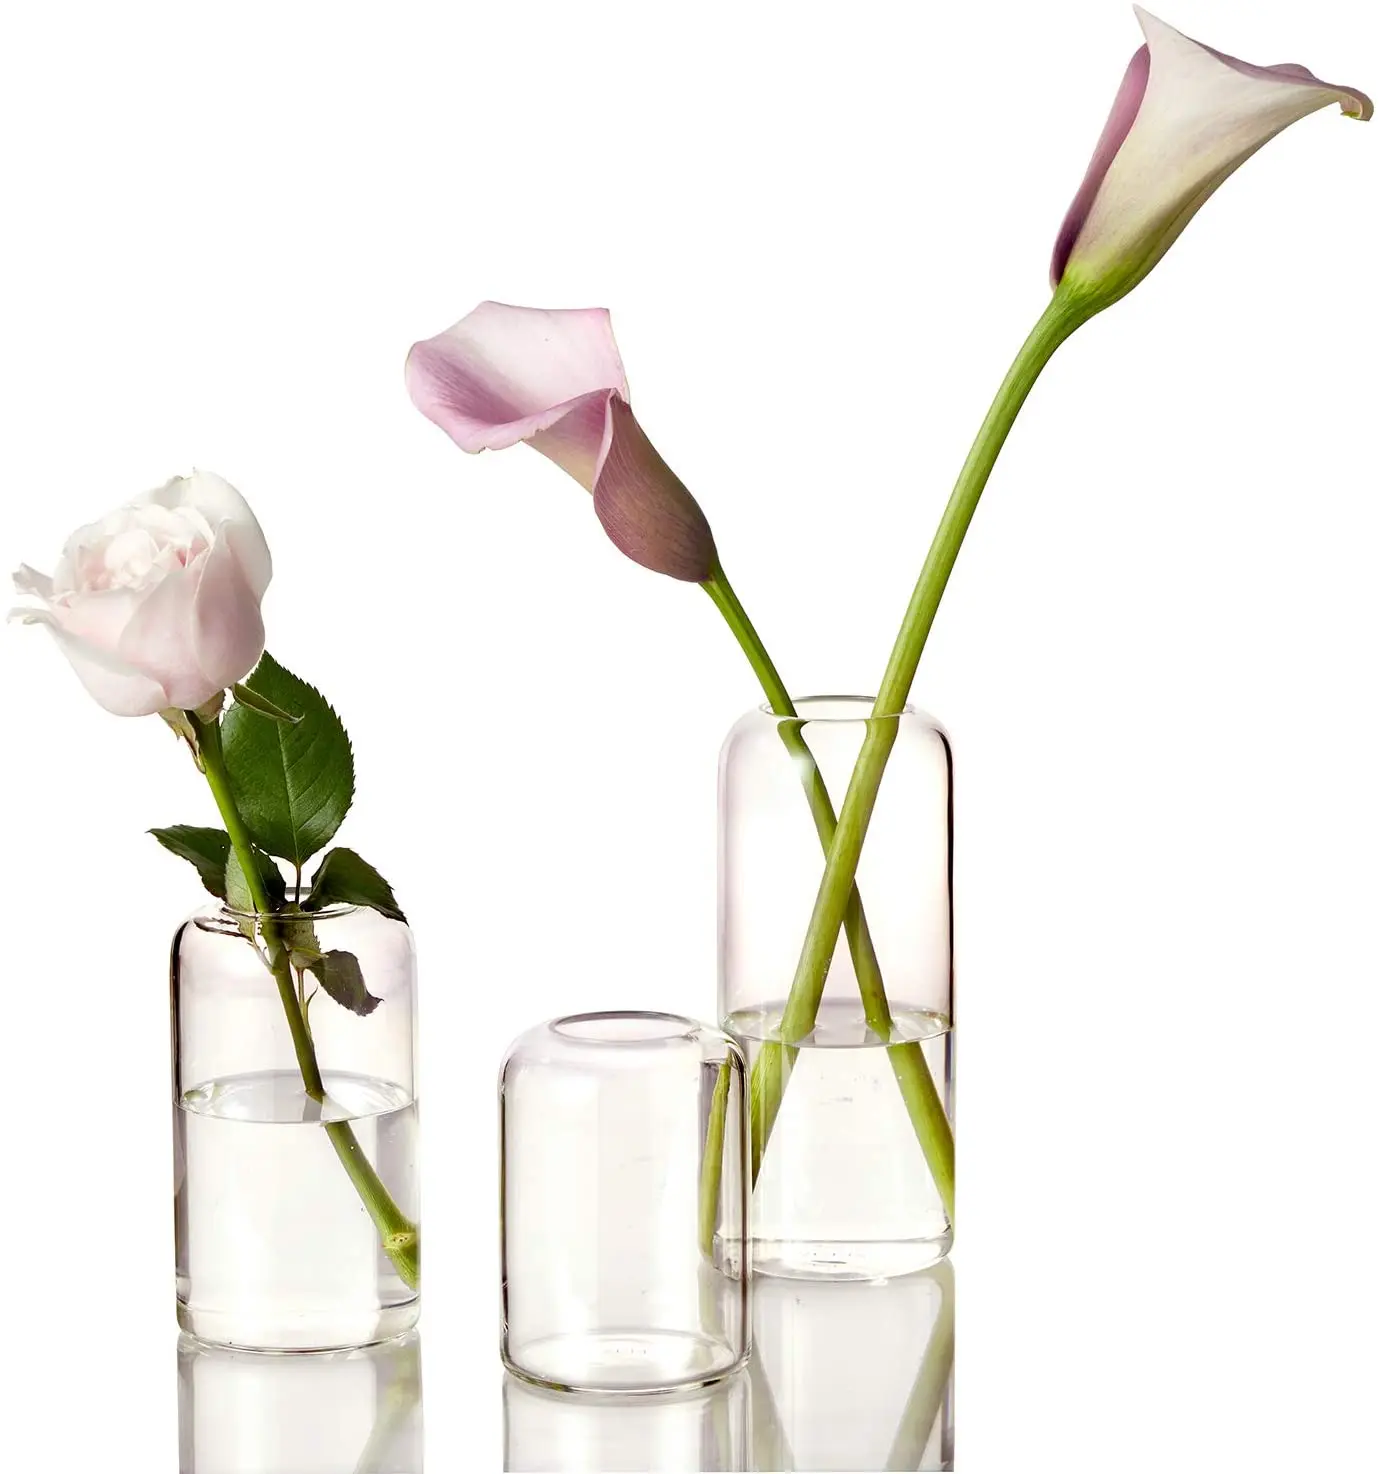 

Cheap Modern Handblown Clear Small Borosilicate Cylinder Glass Bud Flowers Vases for Centerpieces Home Office Wedding Decor